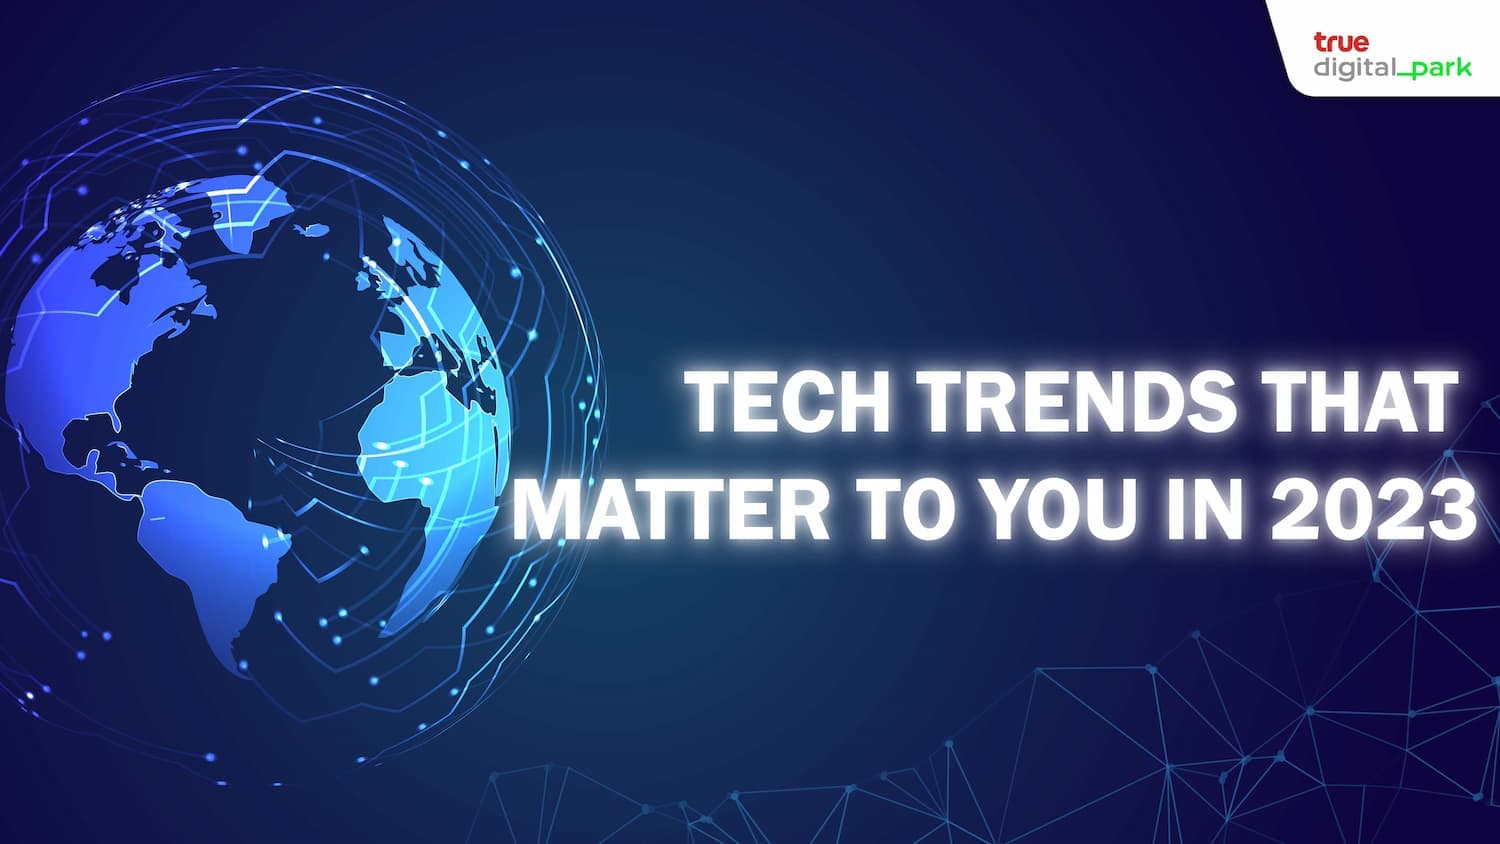 Tech trends that matter to you in 2023